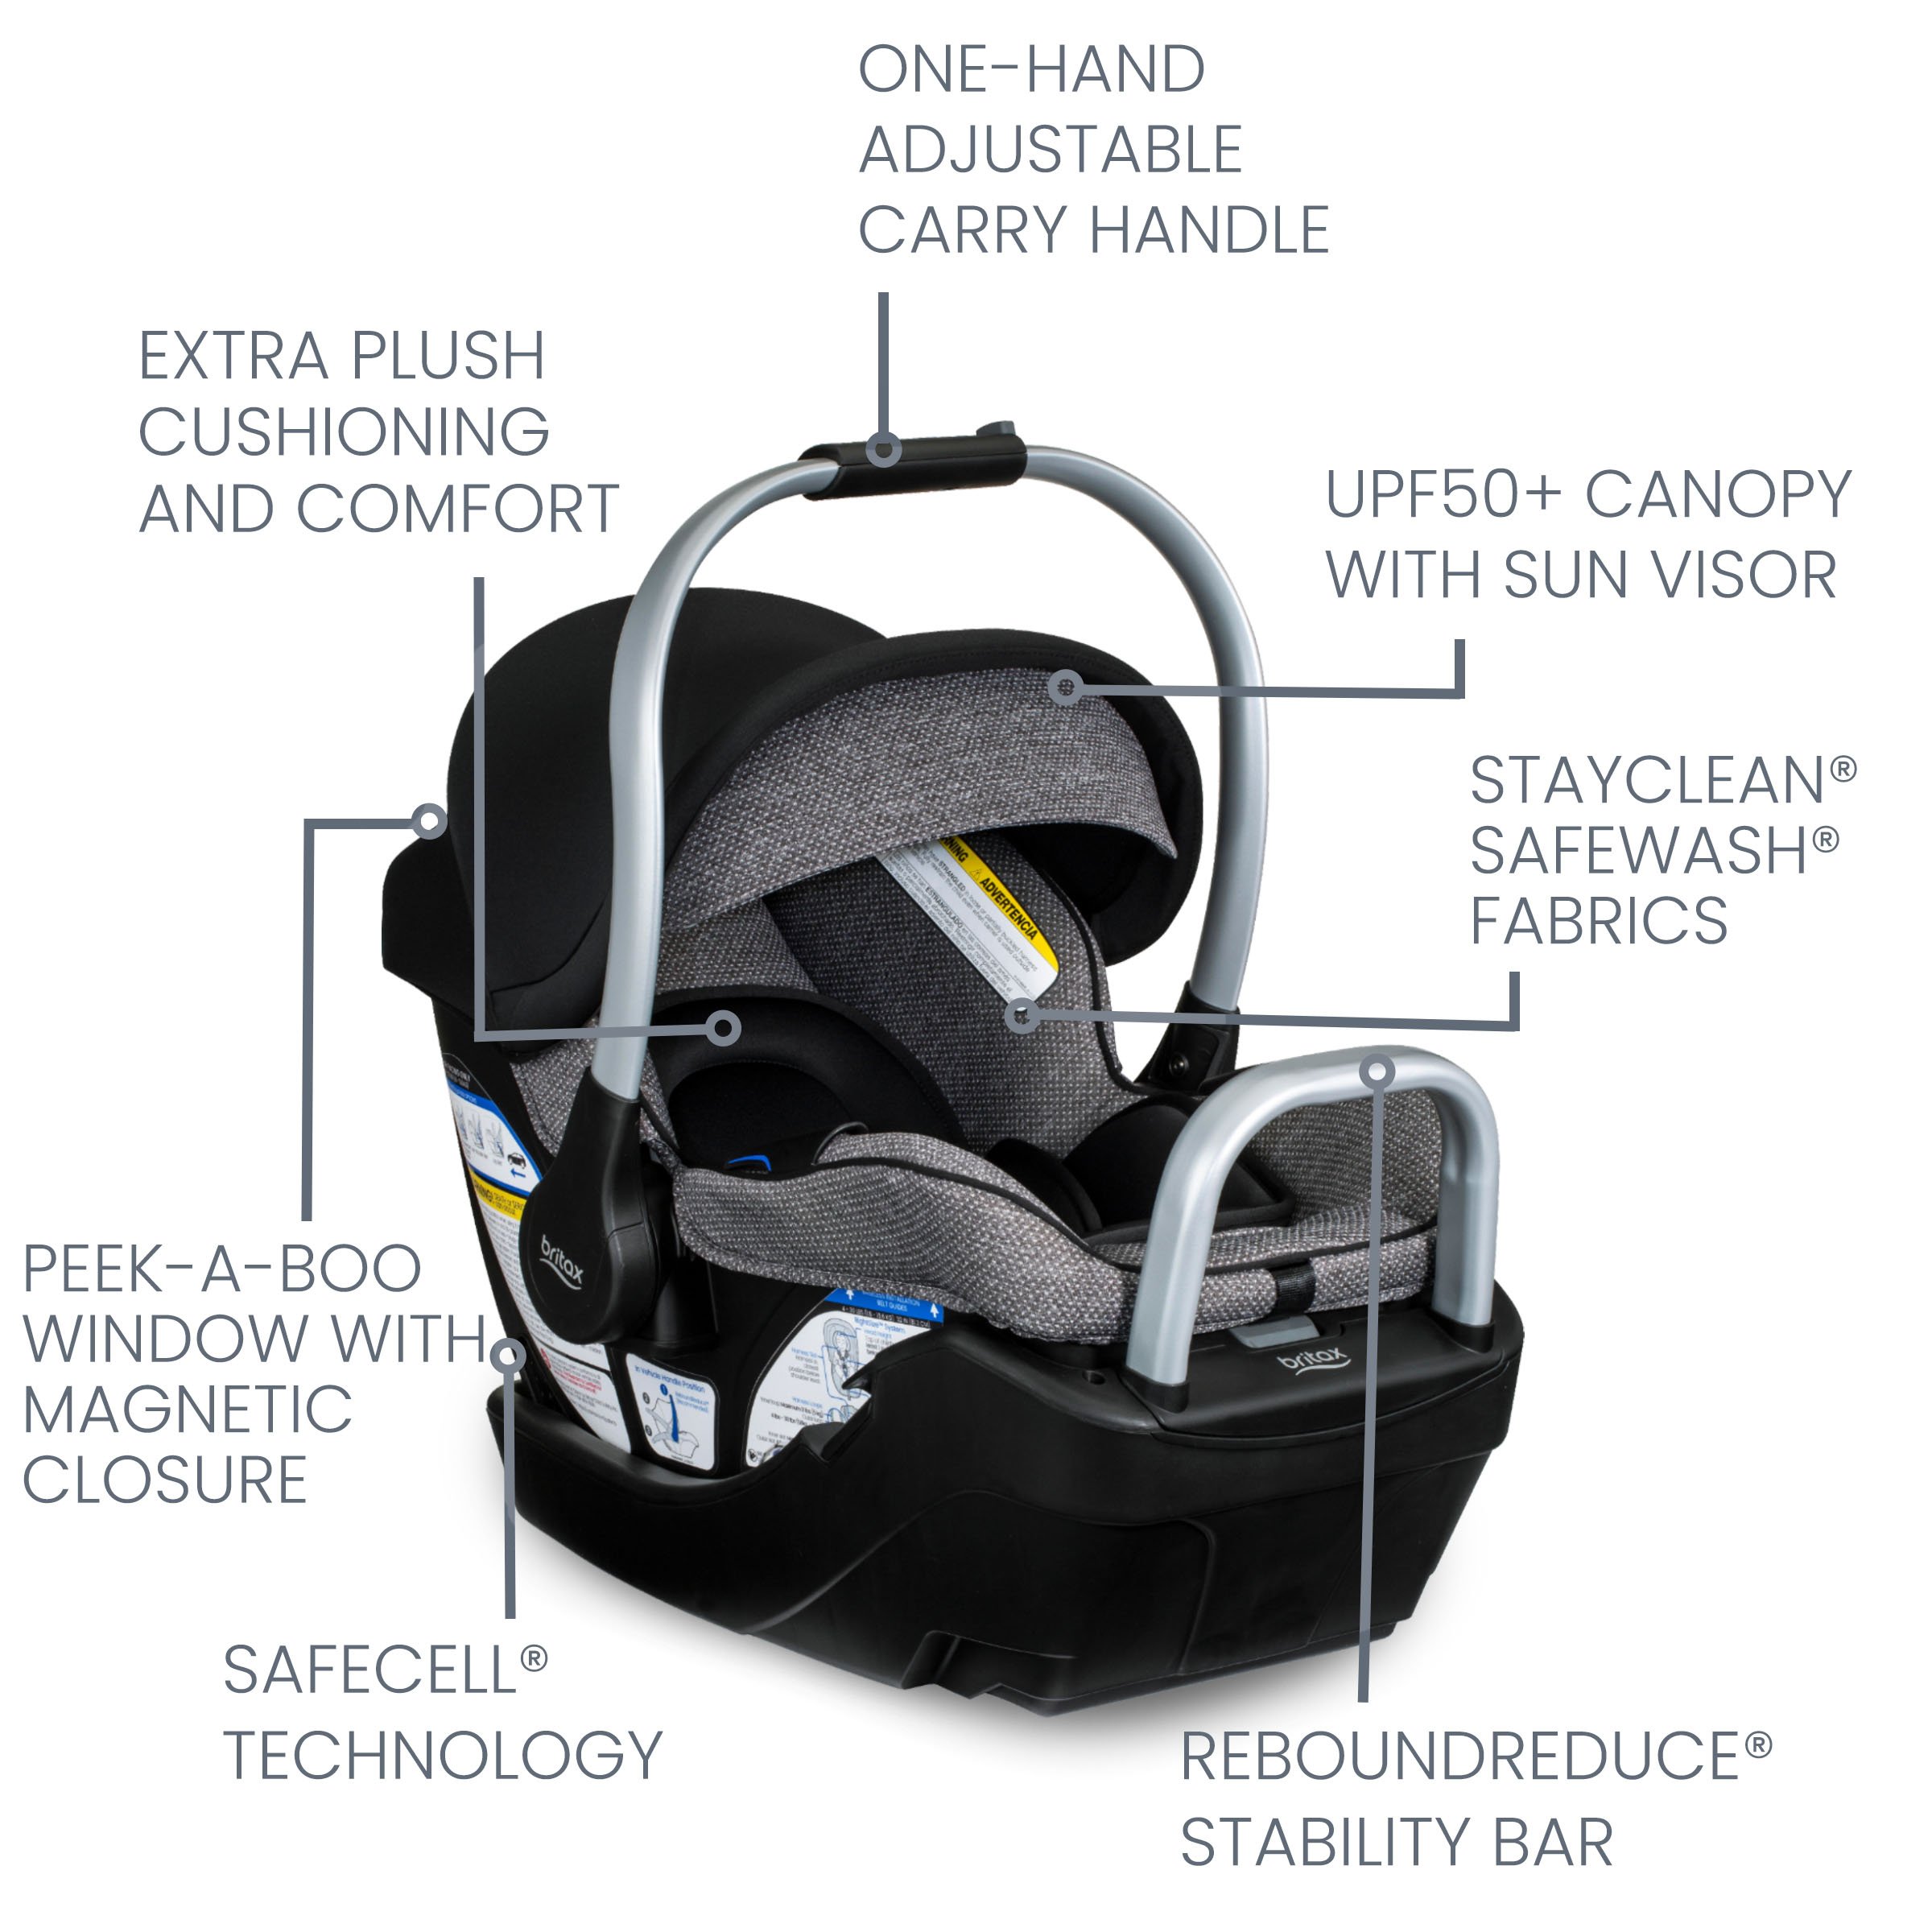 Infant Car Seat Features Labeled